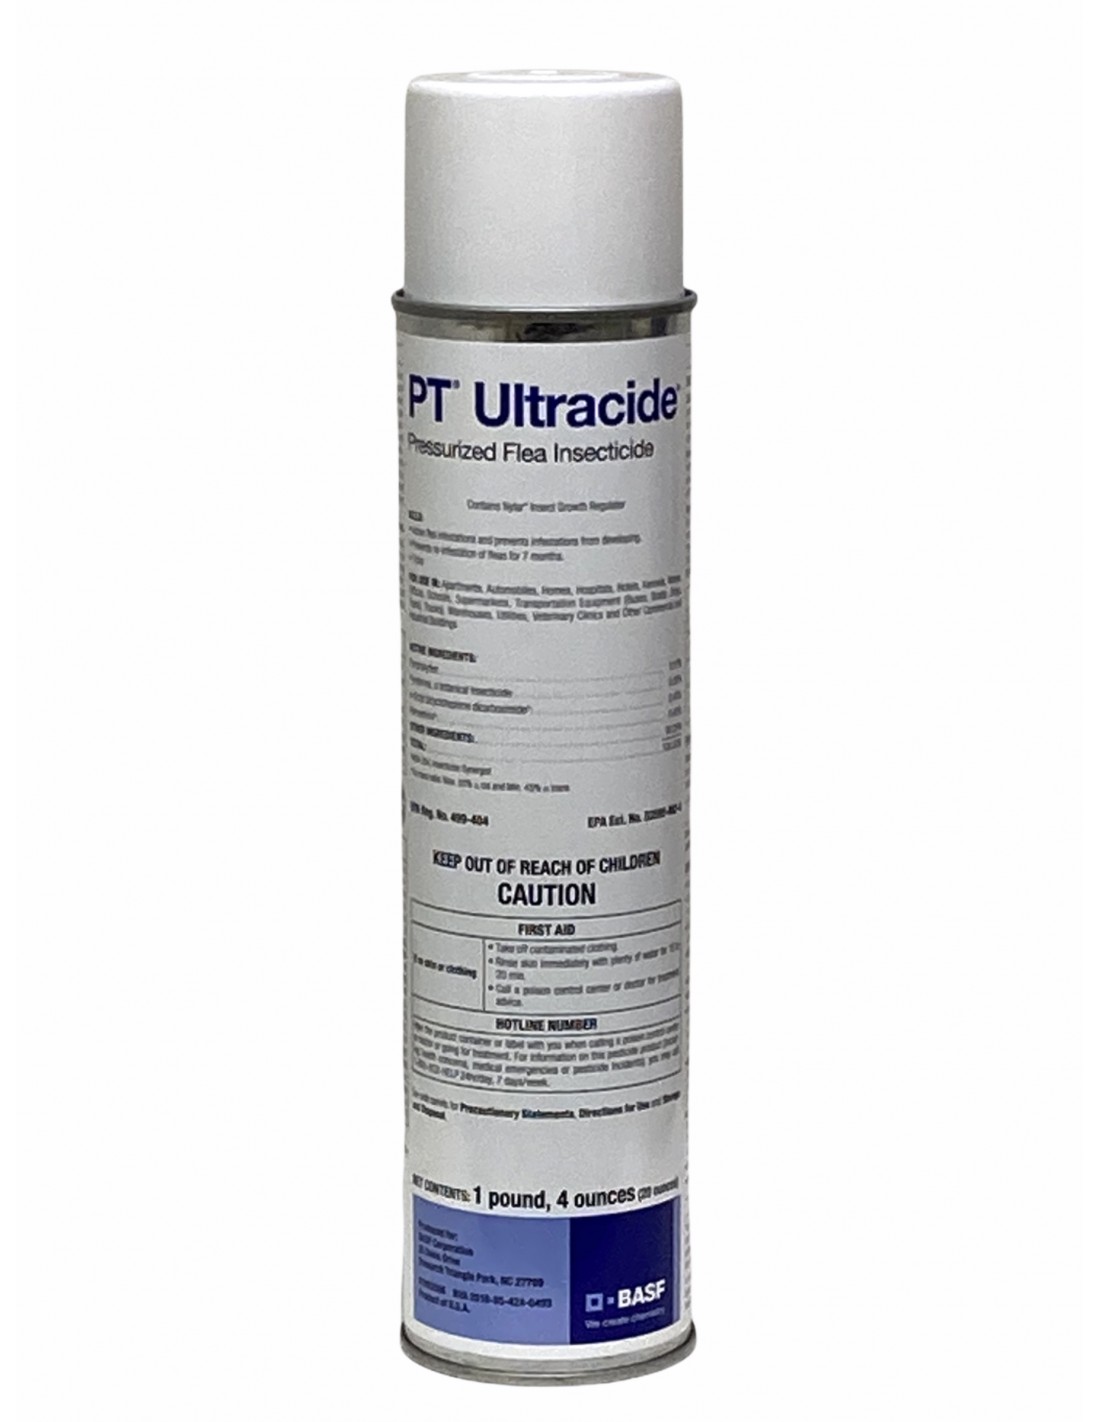 How long do you have to leave the premises after applying PT Ultracide?